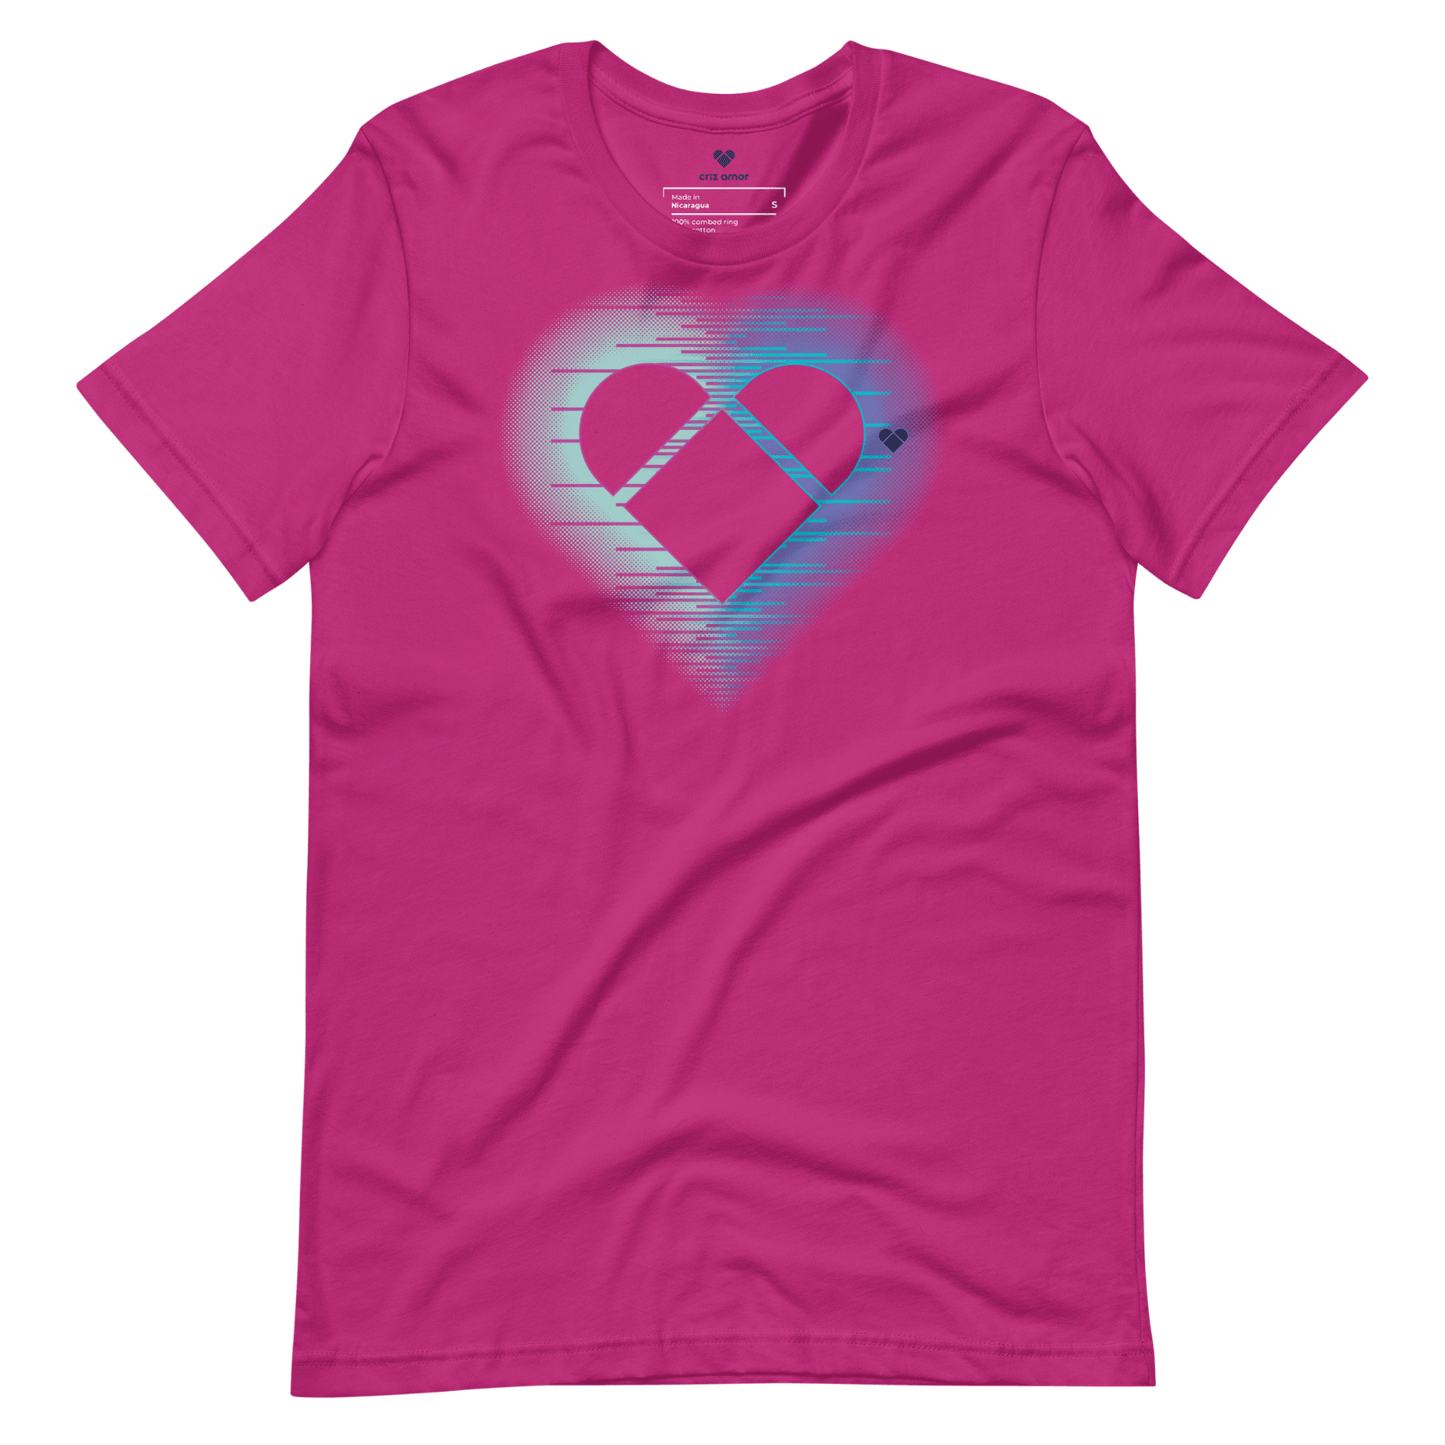 Versatile Pink Tee with Heart Logo for Every Day